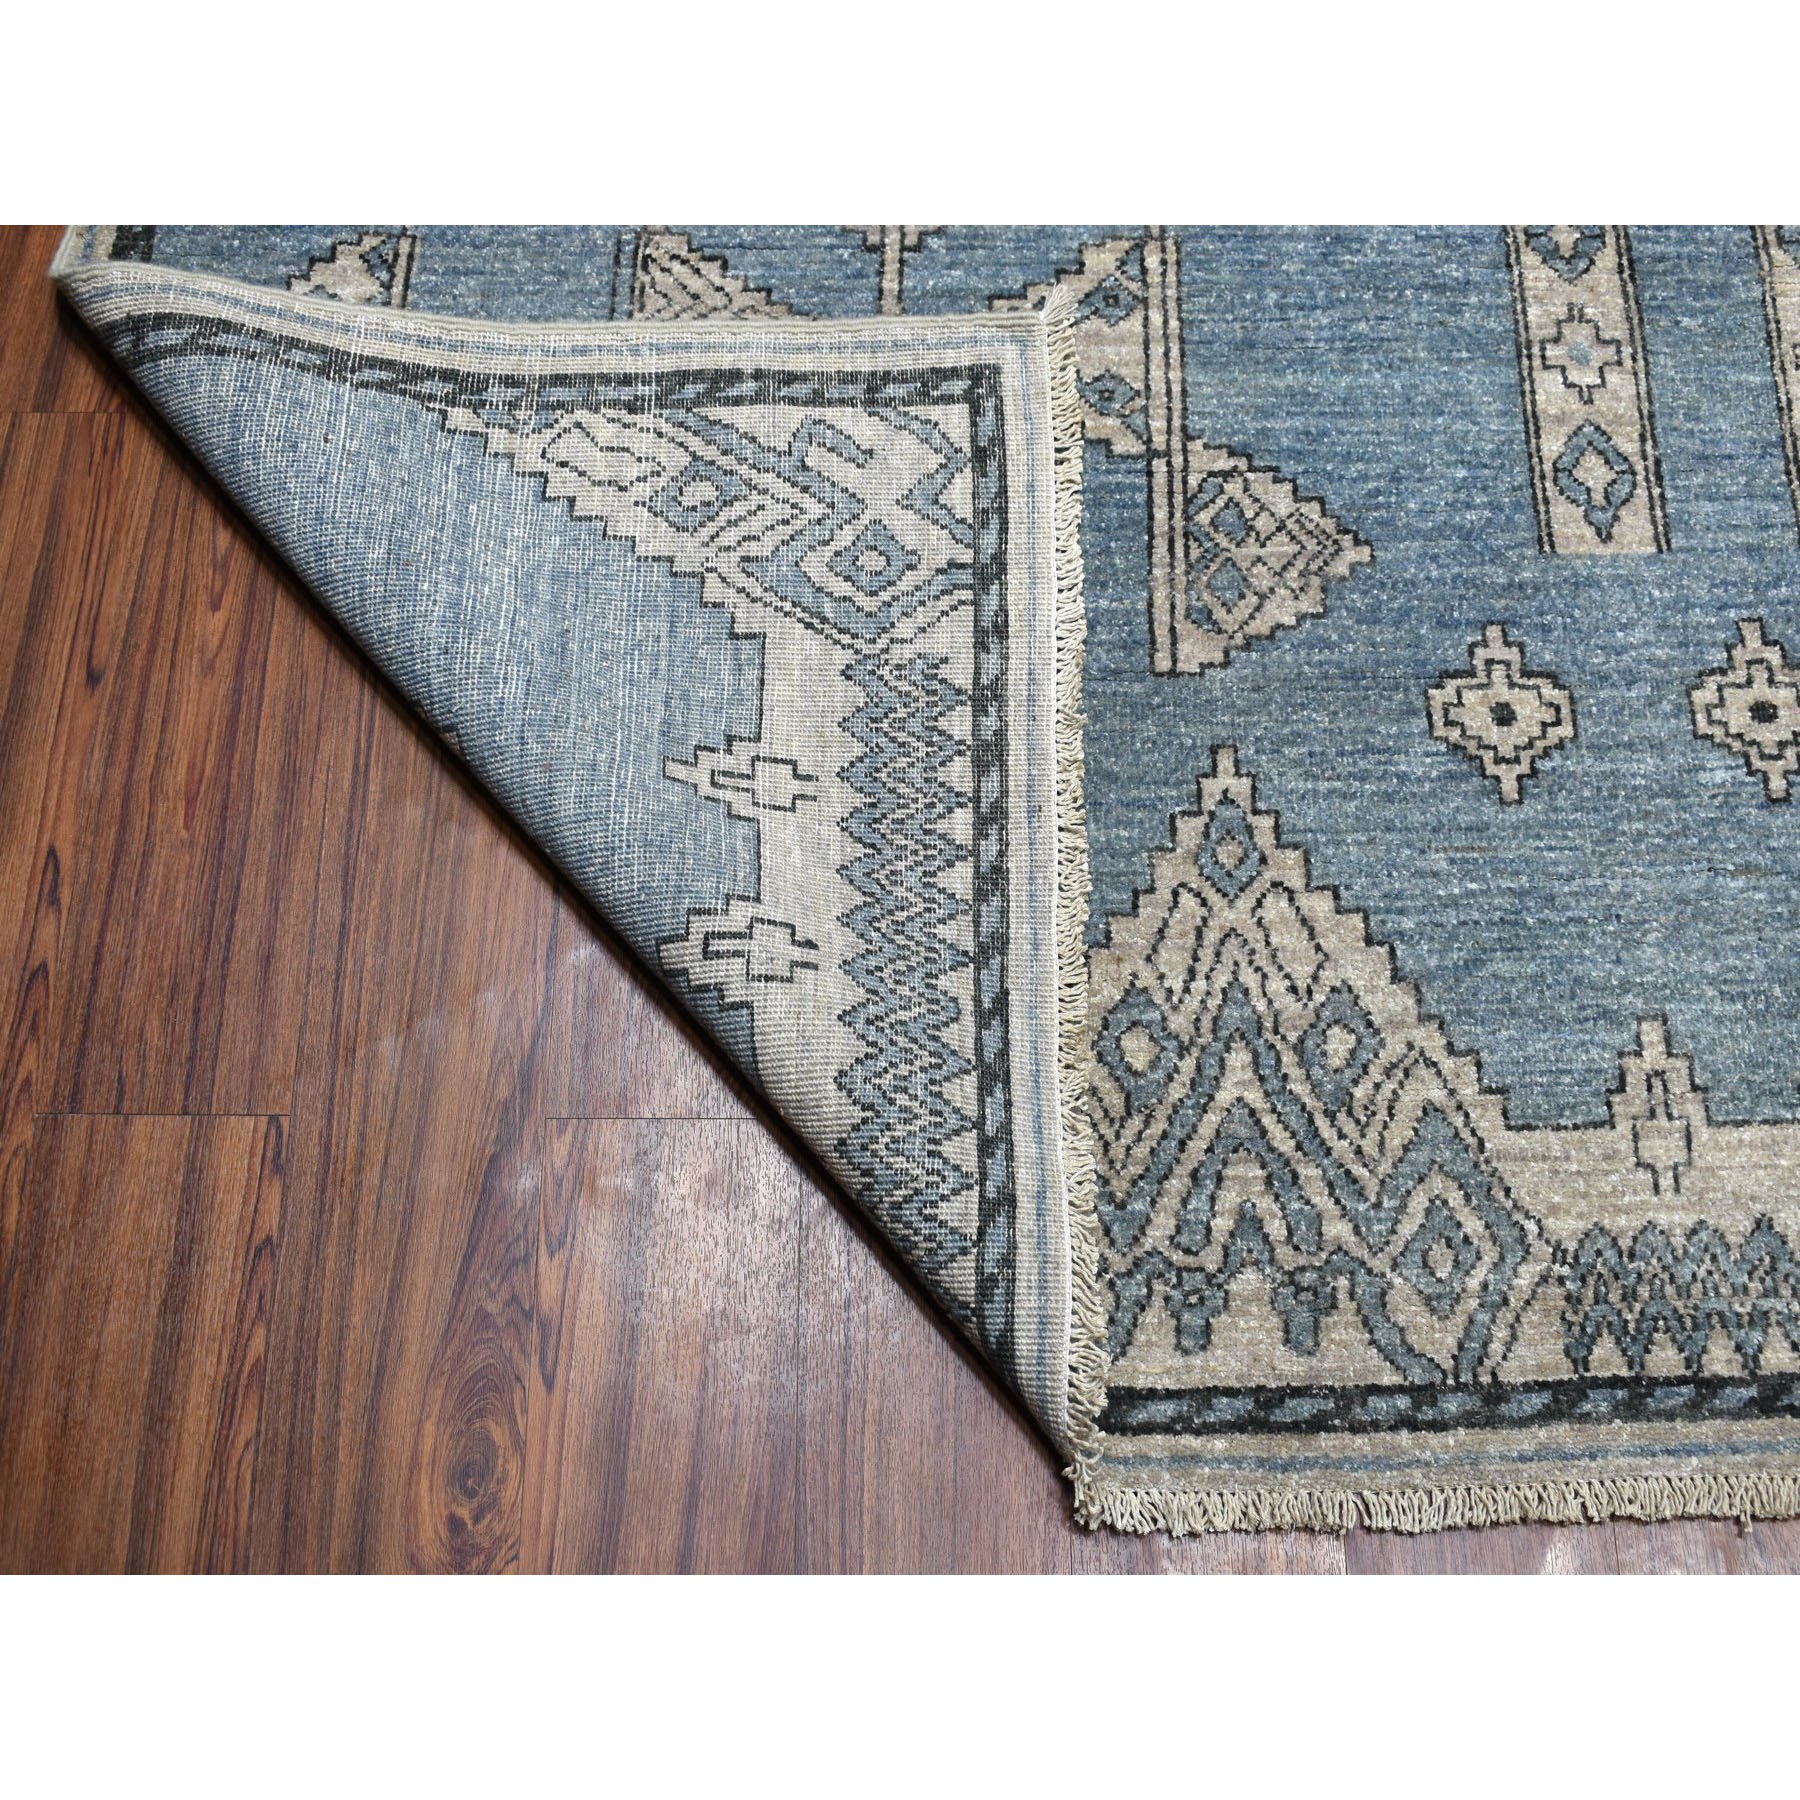 10-1 x13-10  Blue Peshawar With Berber Motifs Design Pure Wool Hand-Knotted Oriental Rug 